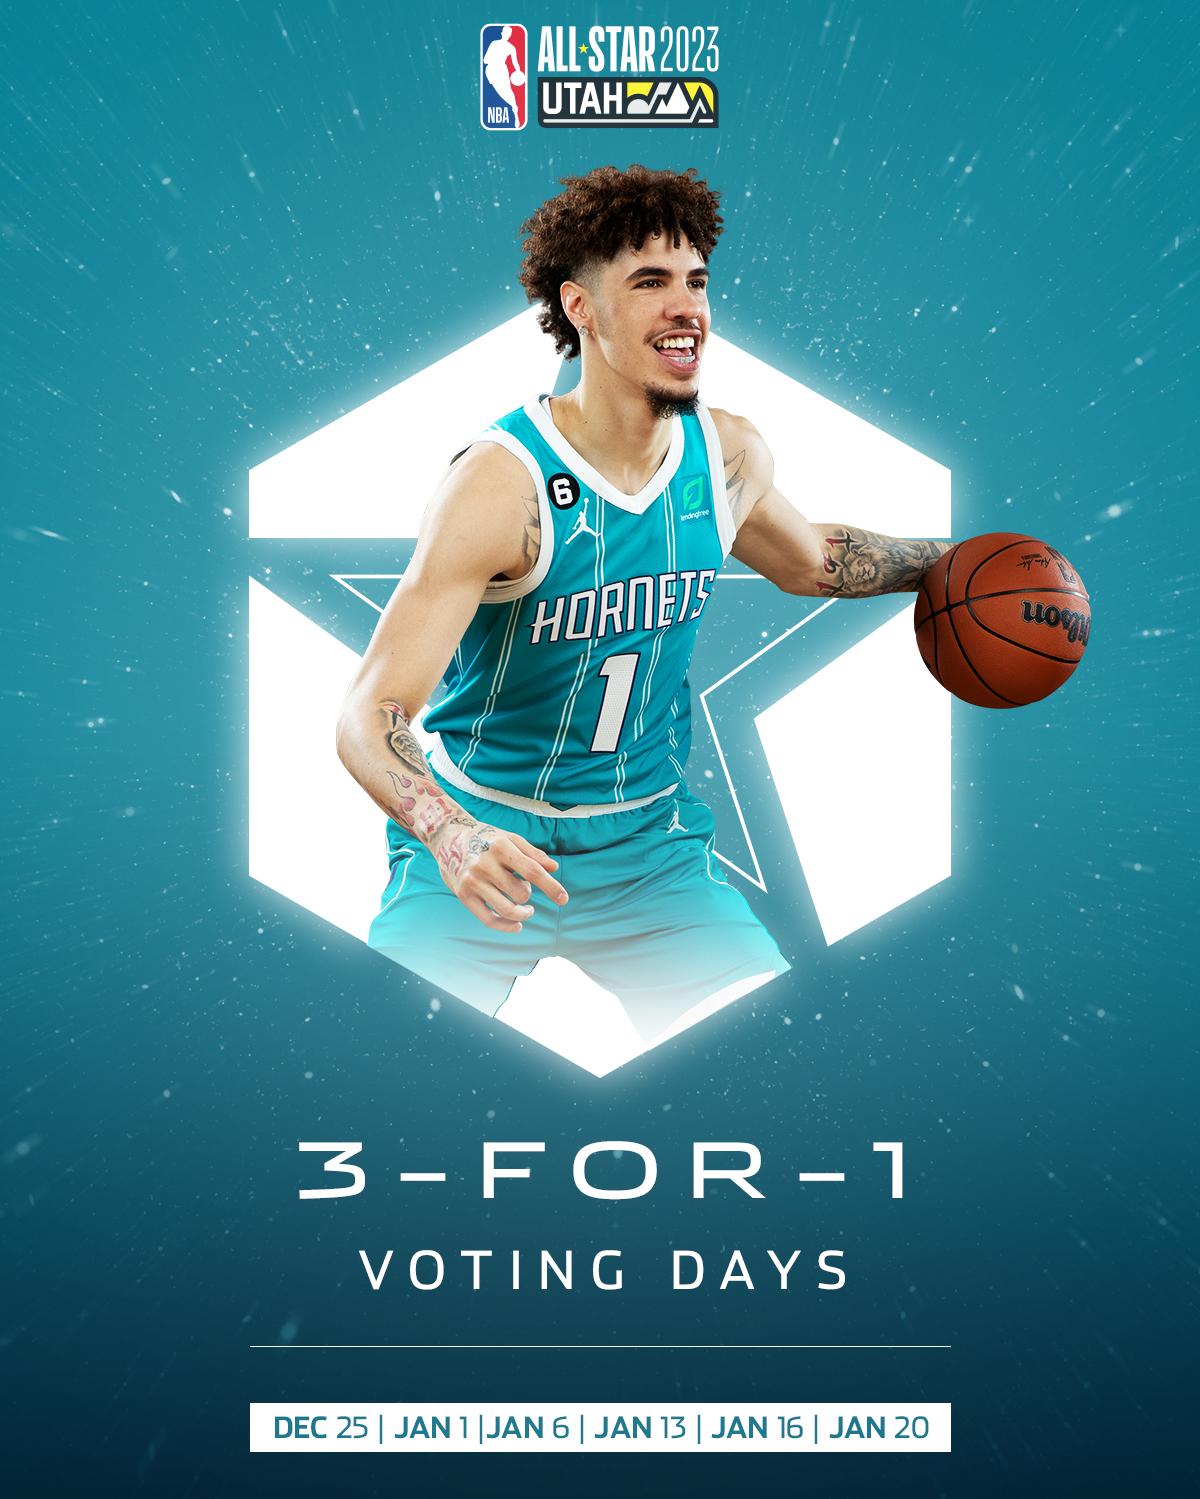 Charlotte Hors On X It S Friday Gameday A For Voting